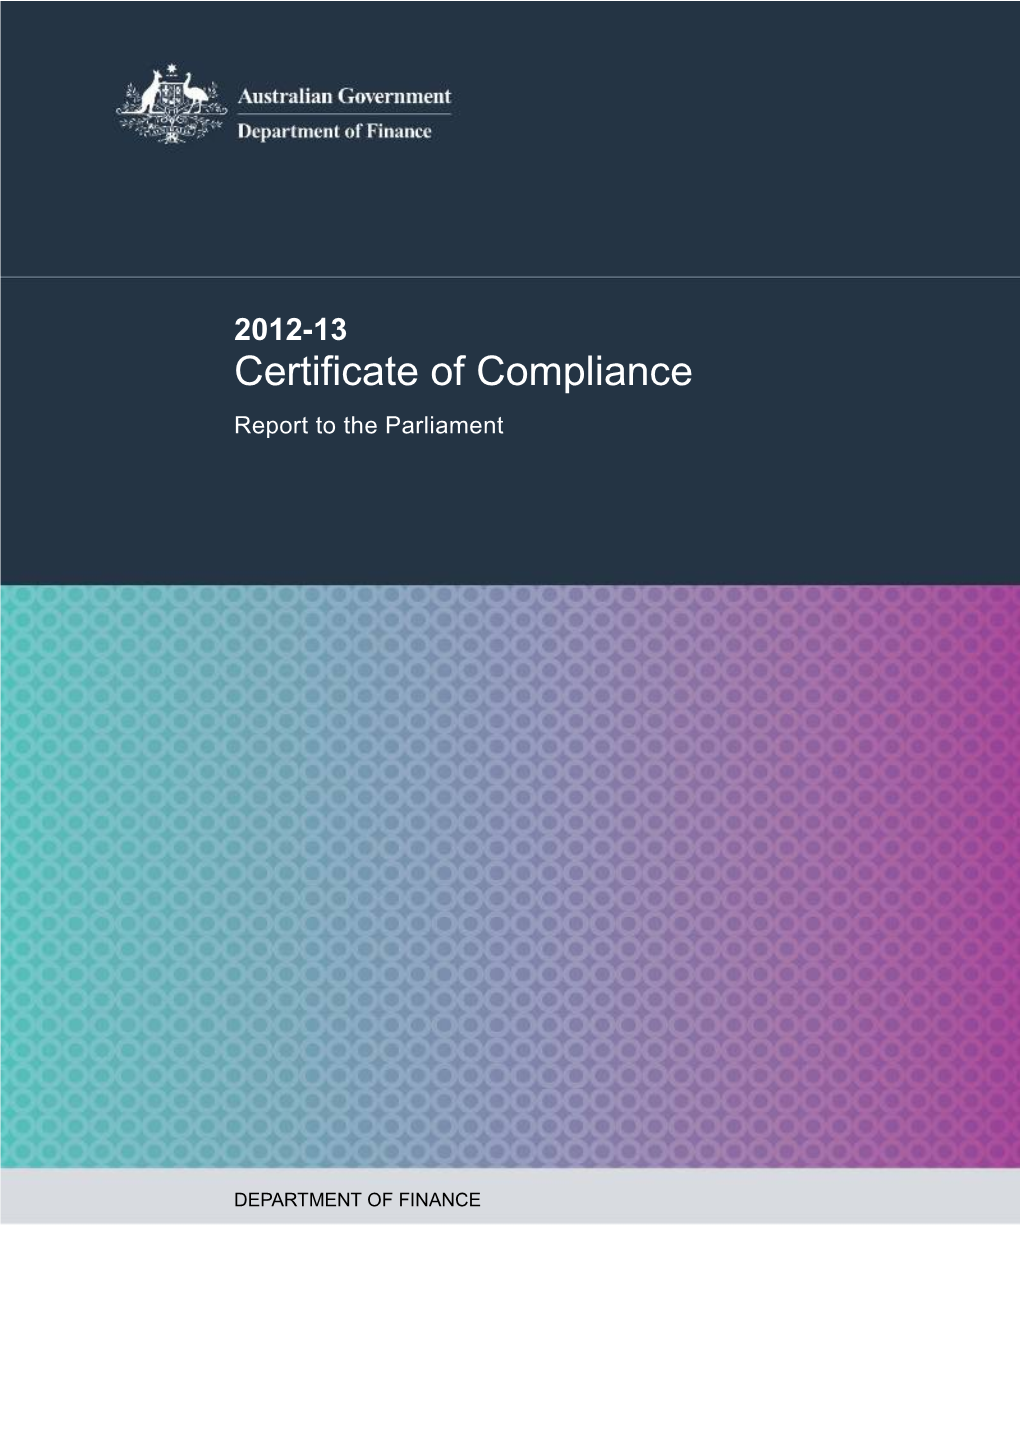 2011-12 Certificate of Compliance Report